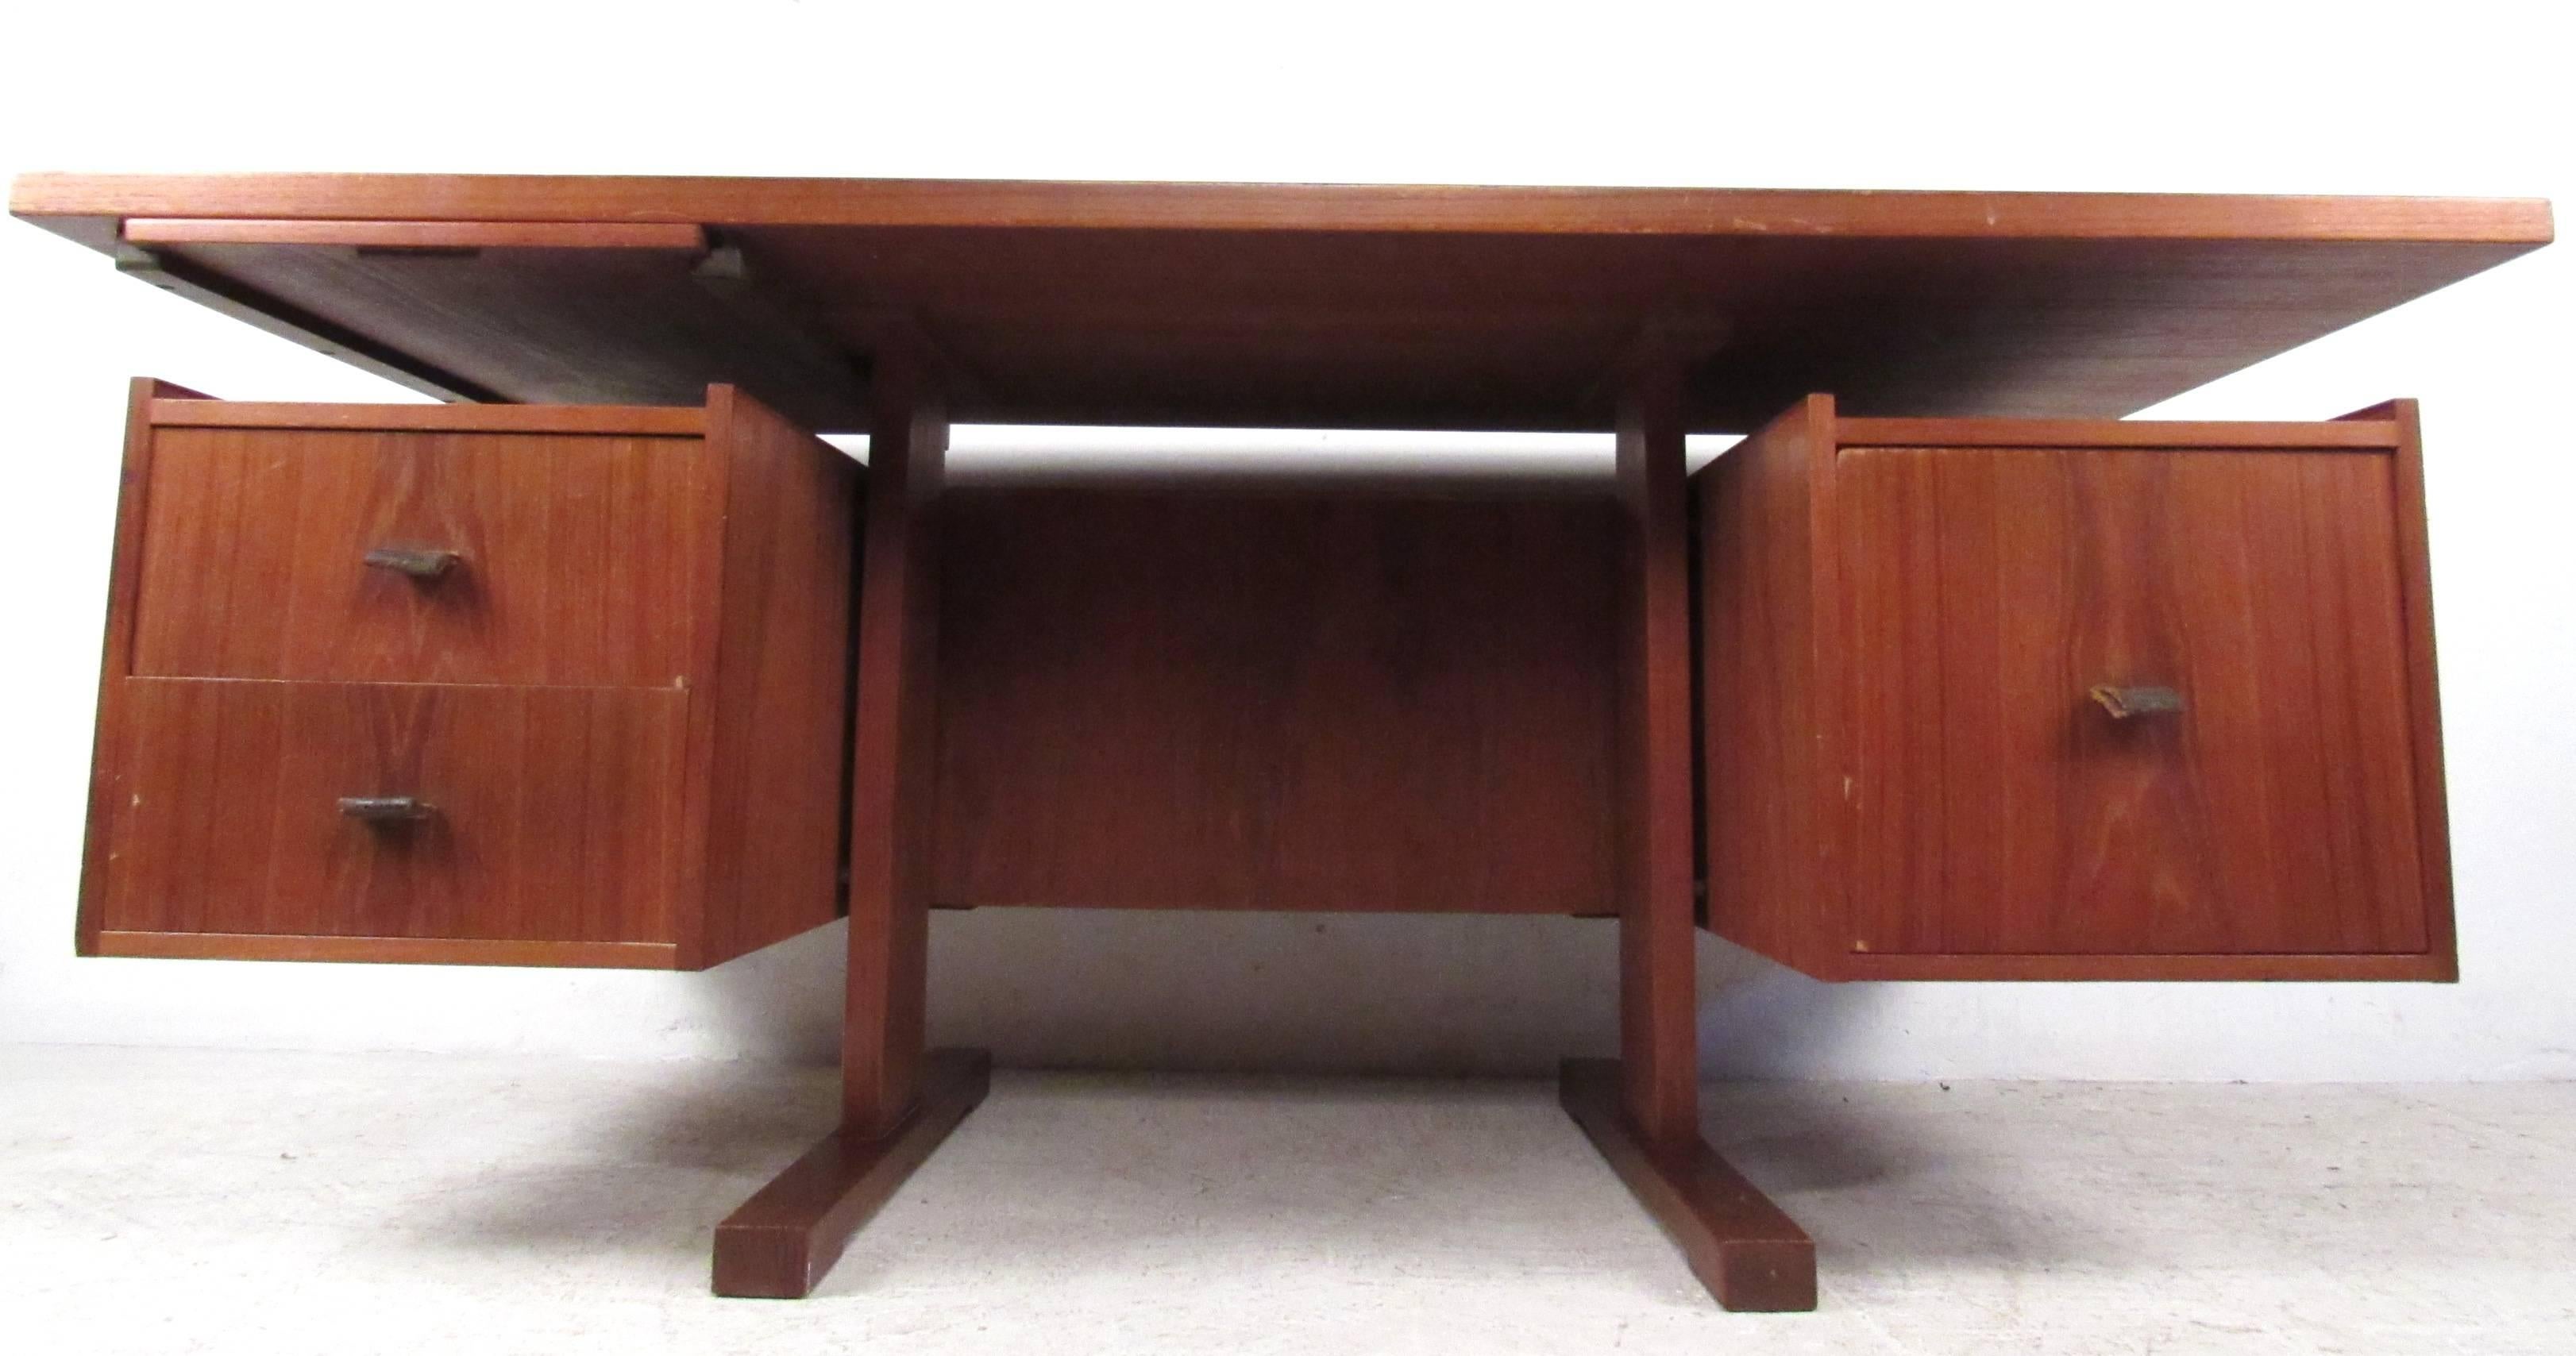 Versatile, double sided Danish modern desk with multiple storage options and retractable work surface. Striking Scandinavian Teak finish and spacious storage makes this the perfect desk for home or office workspace. Please confirm item location (NY